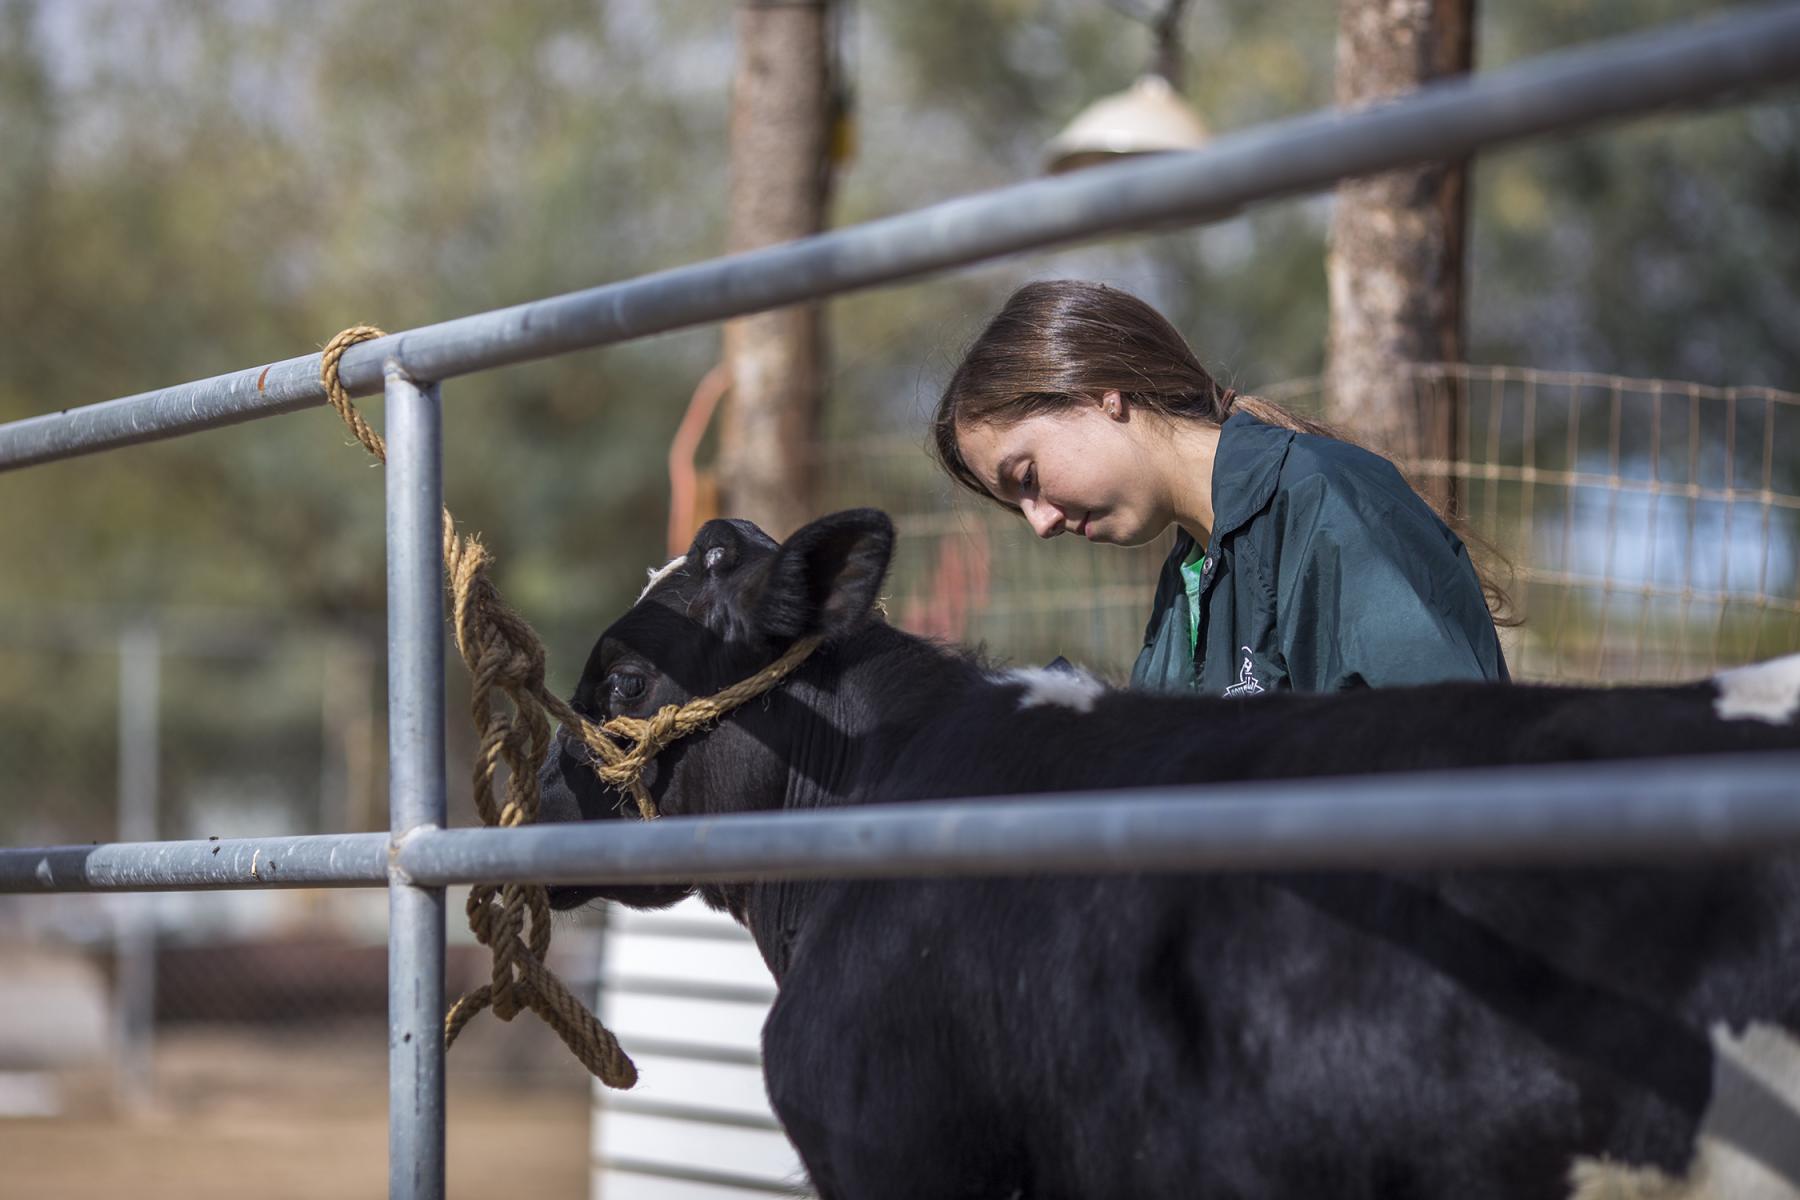 teen girl looks down at dairy calf tied to fence.